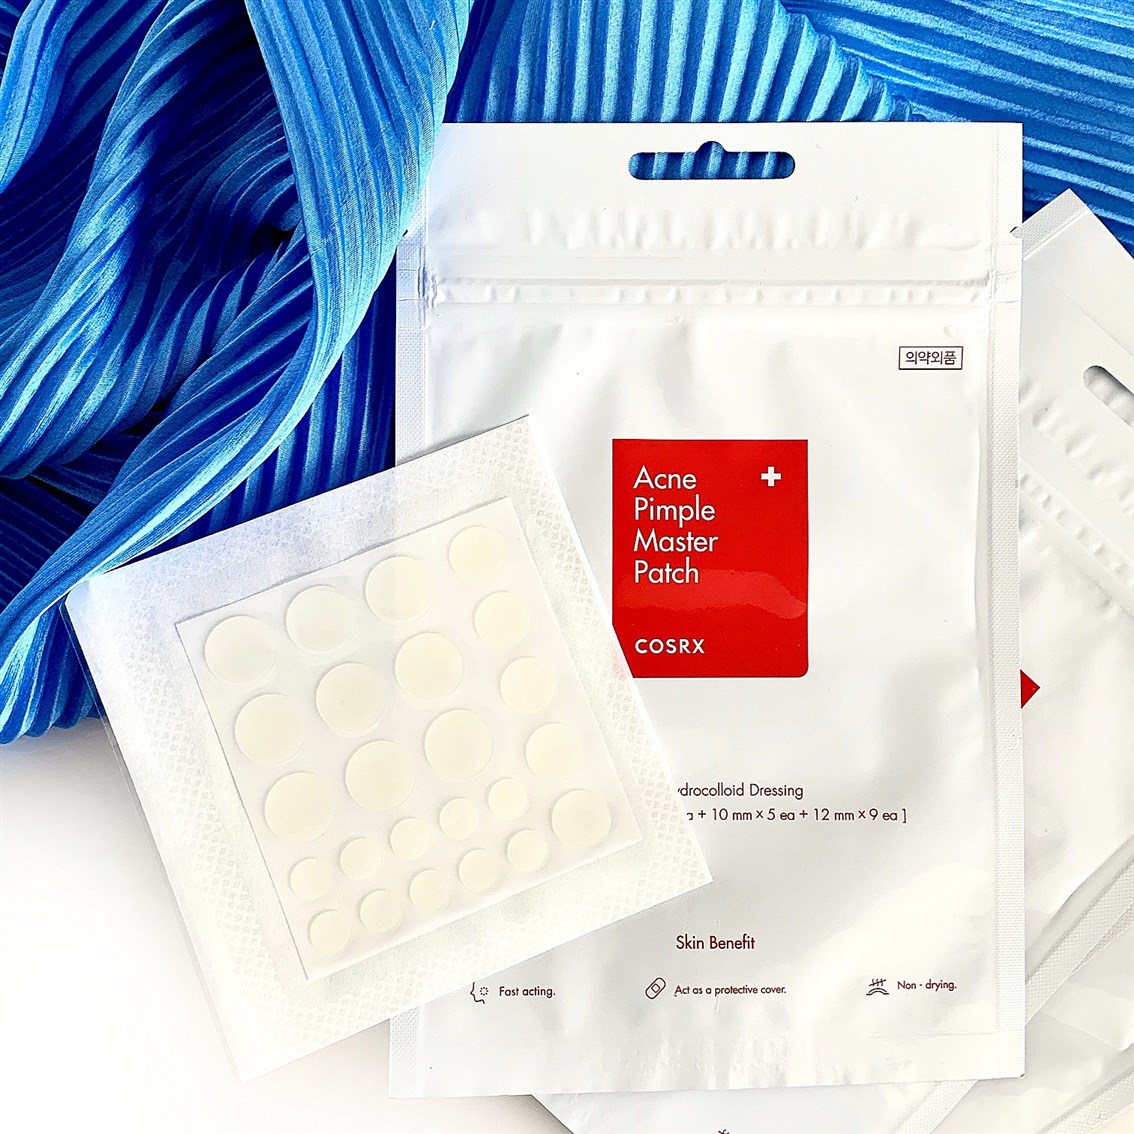 Cosrx Acne Pimple Master Patch opinie